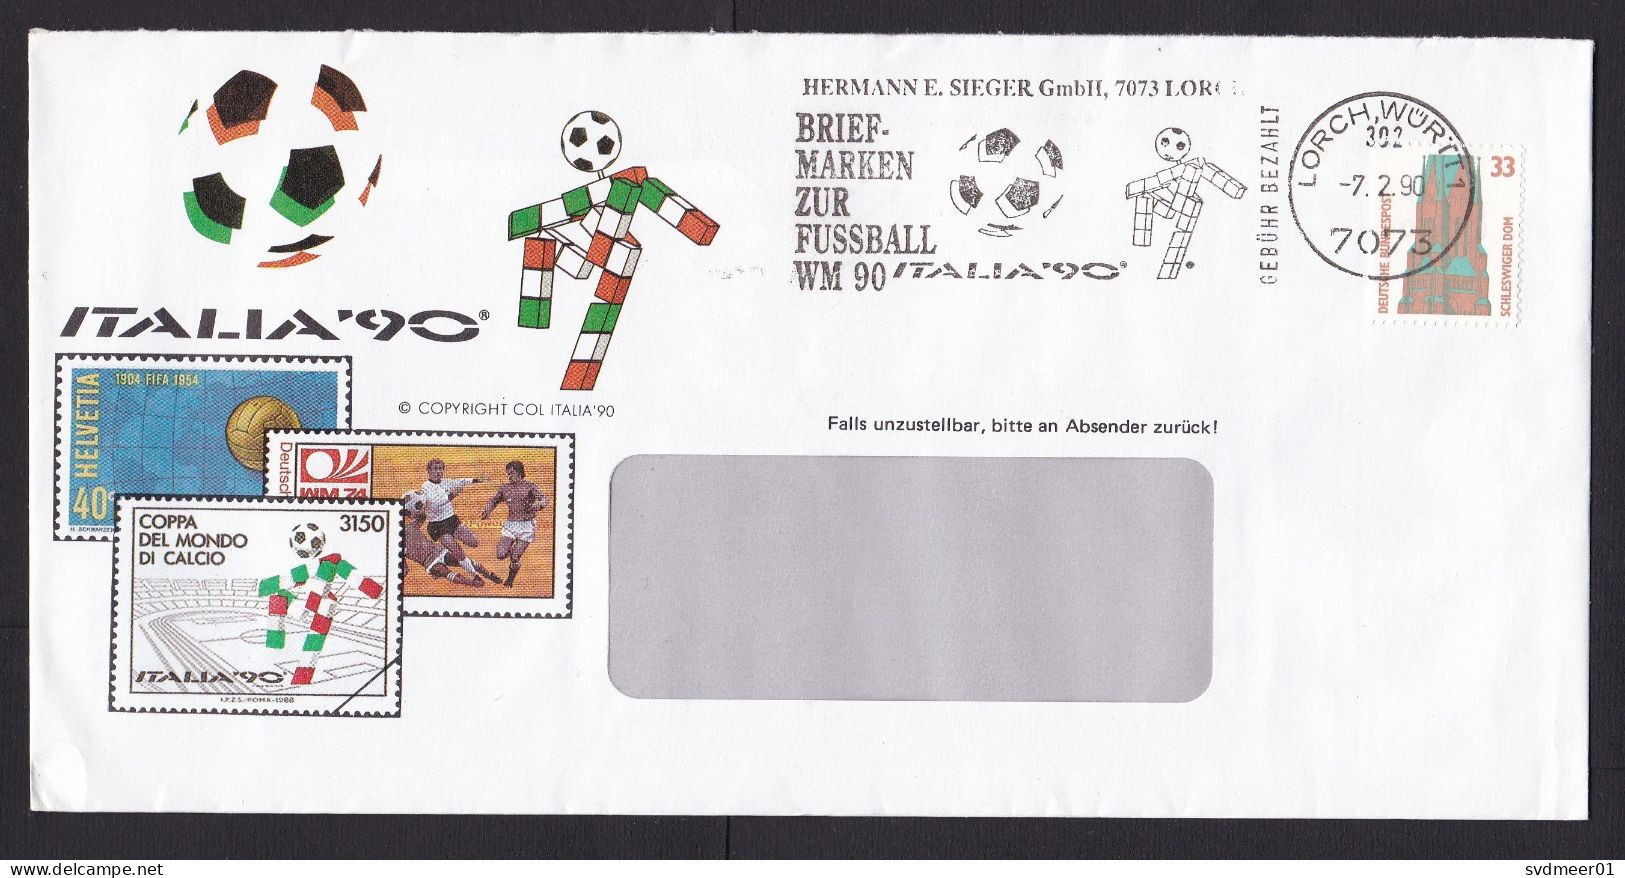 Germany: Advertorial Cover, 1990, 1 Stamp, Church, Cancel Soccer, Football, Sports, Sent By Sieger (traces Of Use) - Covers & Documents